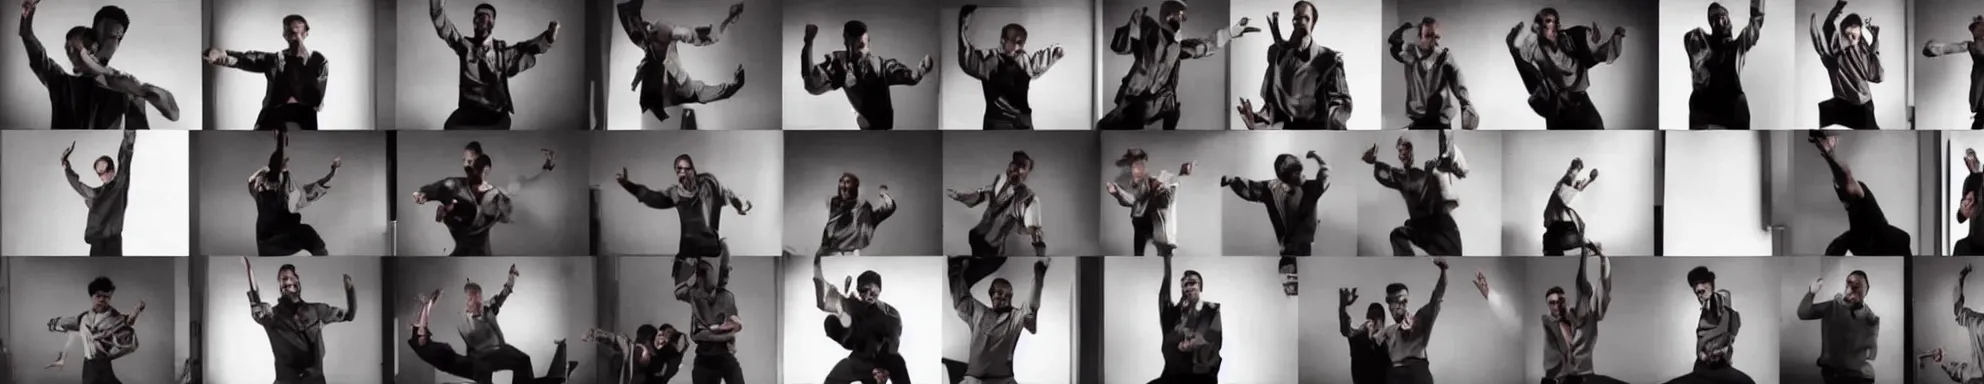 Image similar to 6 frames from a video of a man dancing